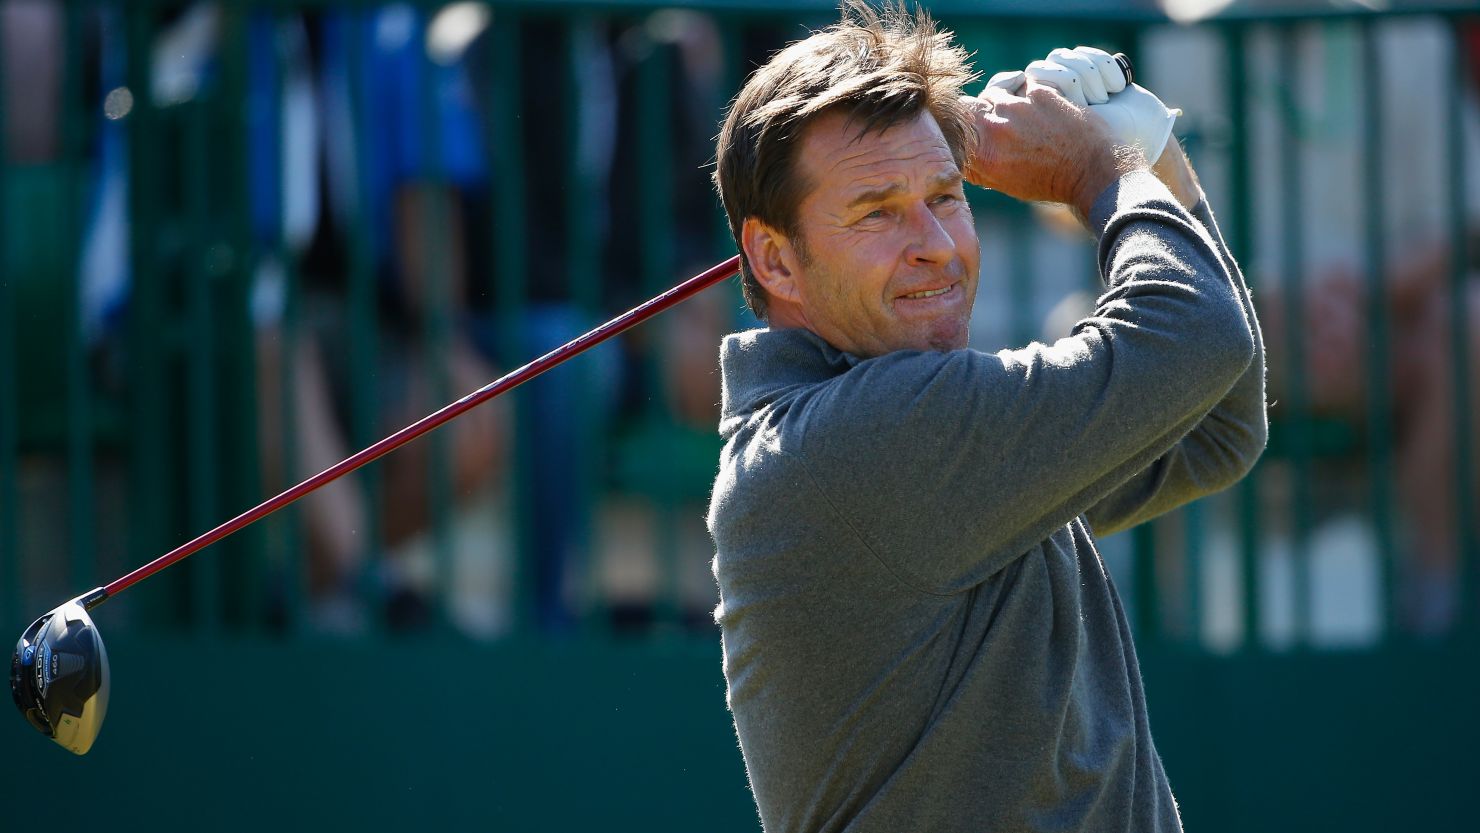 Nick Faldo tees off during a practice round prior to the start of the 143rd Open Championship at Royal Liverpool.